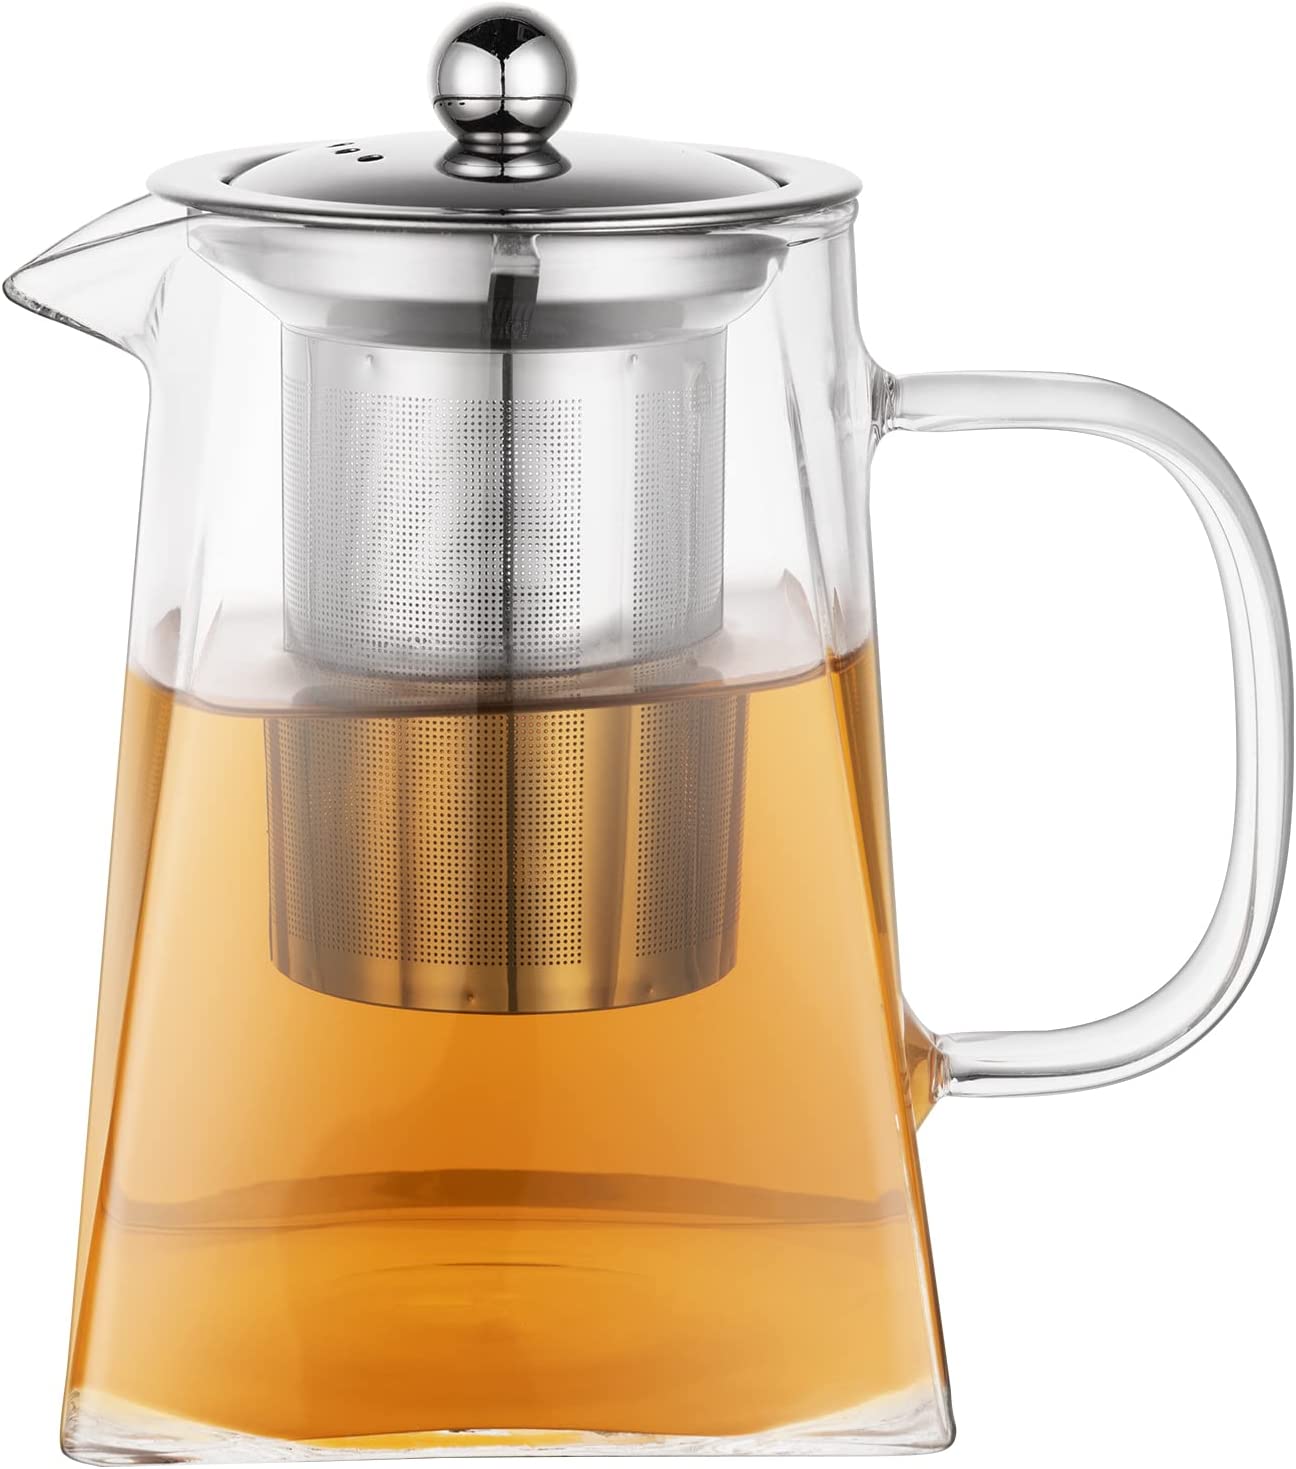 Wisolt Glass Teapots with Removable Infuser, Tall Borosilicate Glass Teapot for Loose Leaves, Square Shape, Stainless Steel Sieve & Stainless Steel Lid, transparent, 750ml